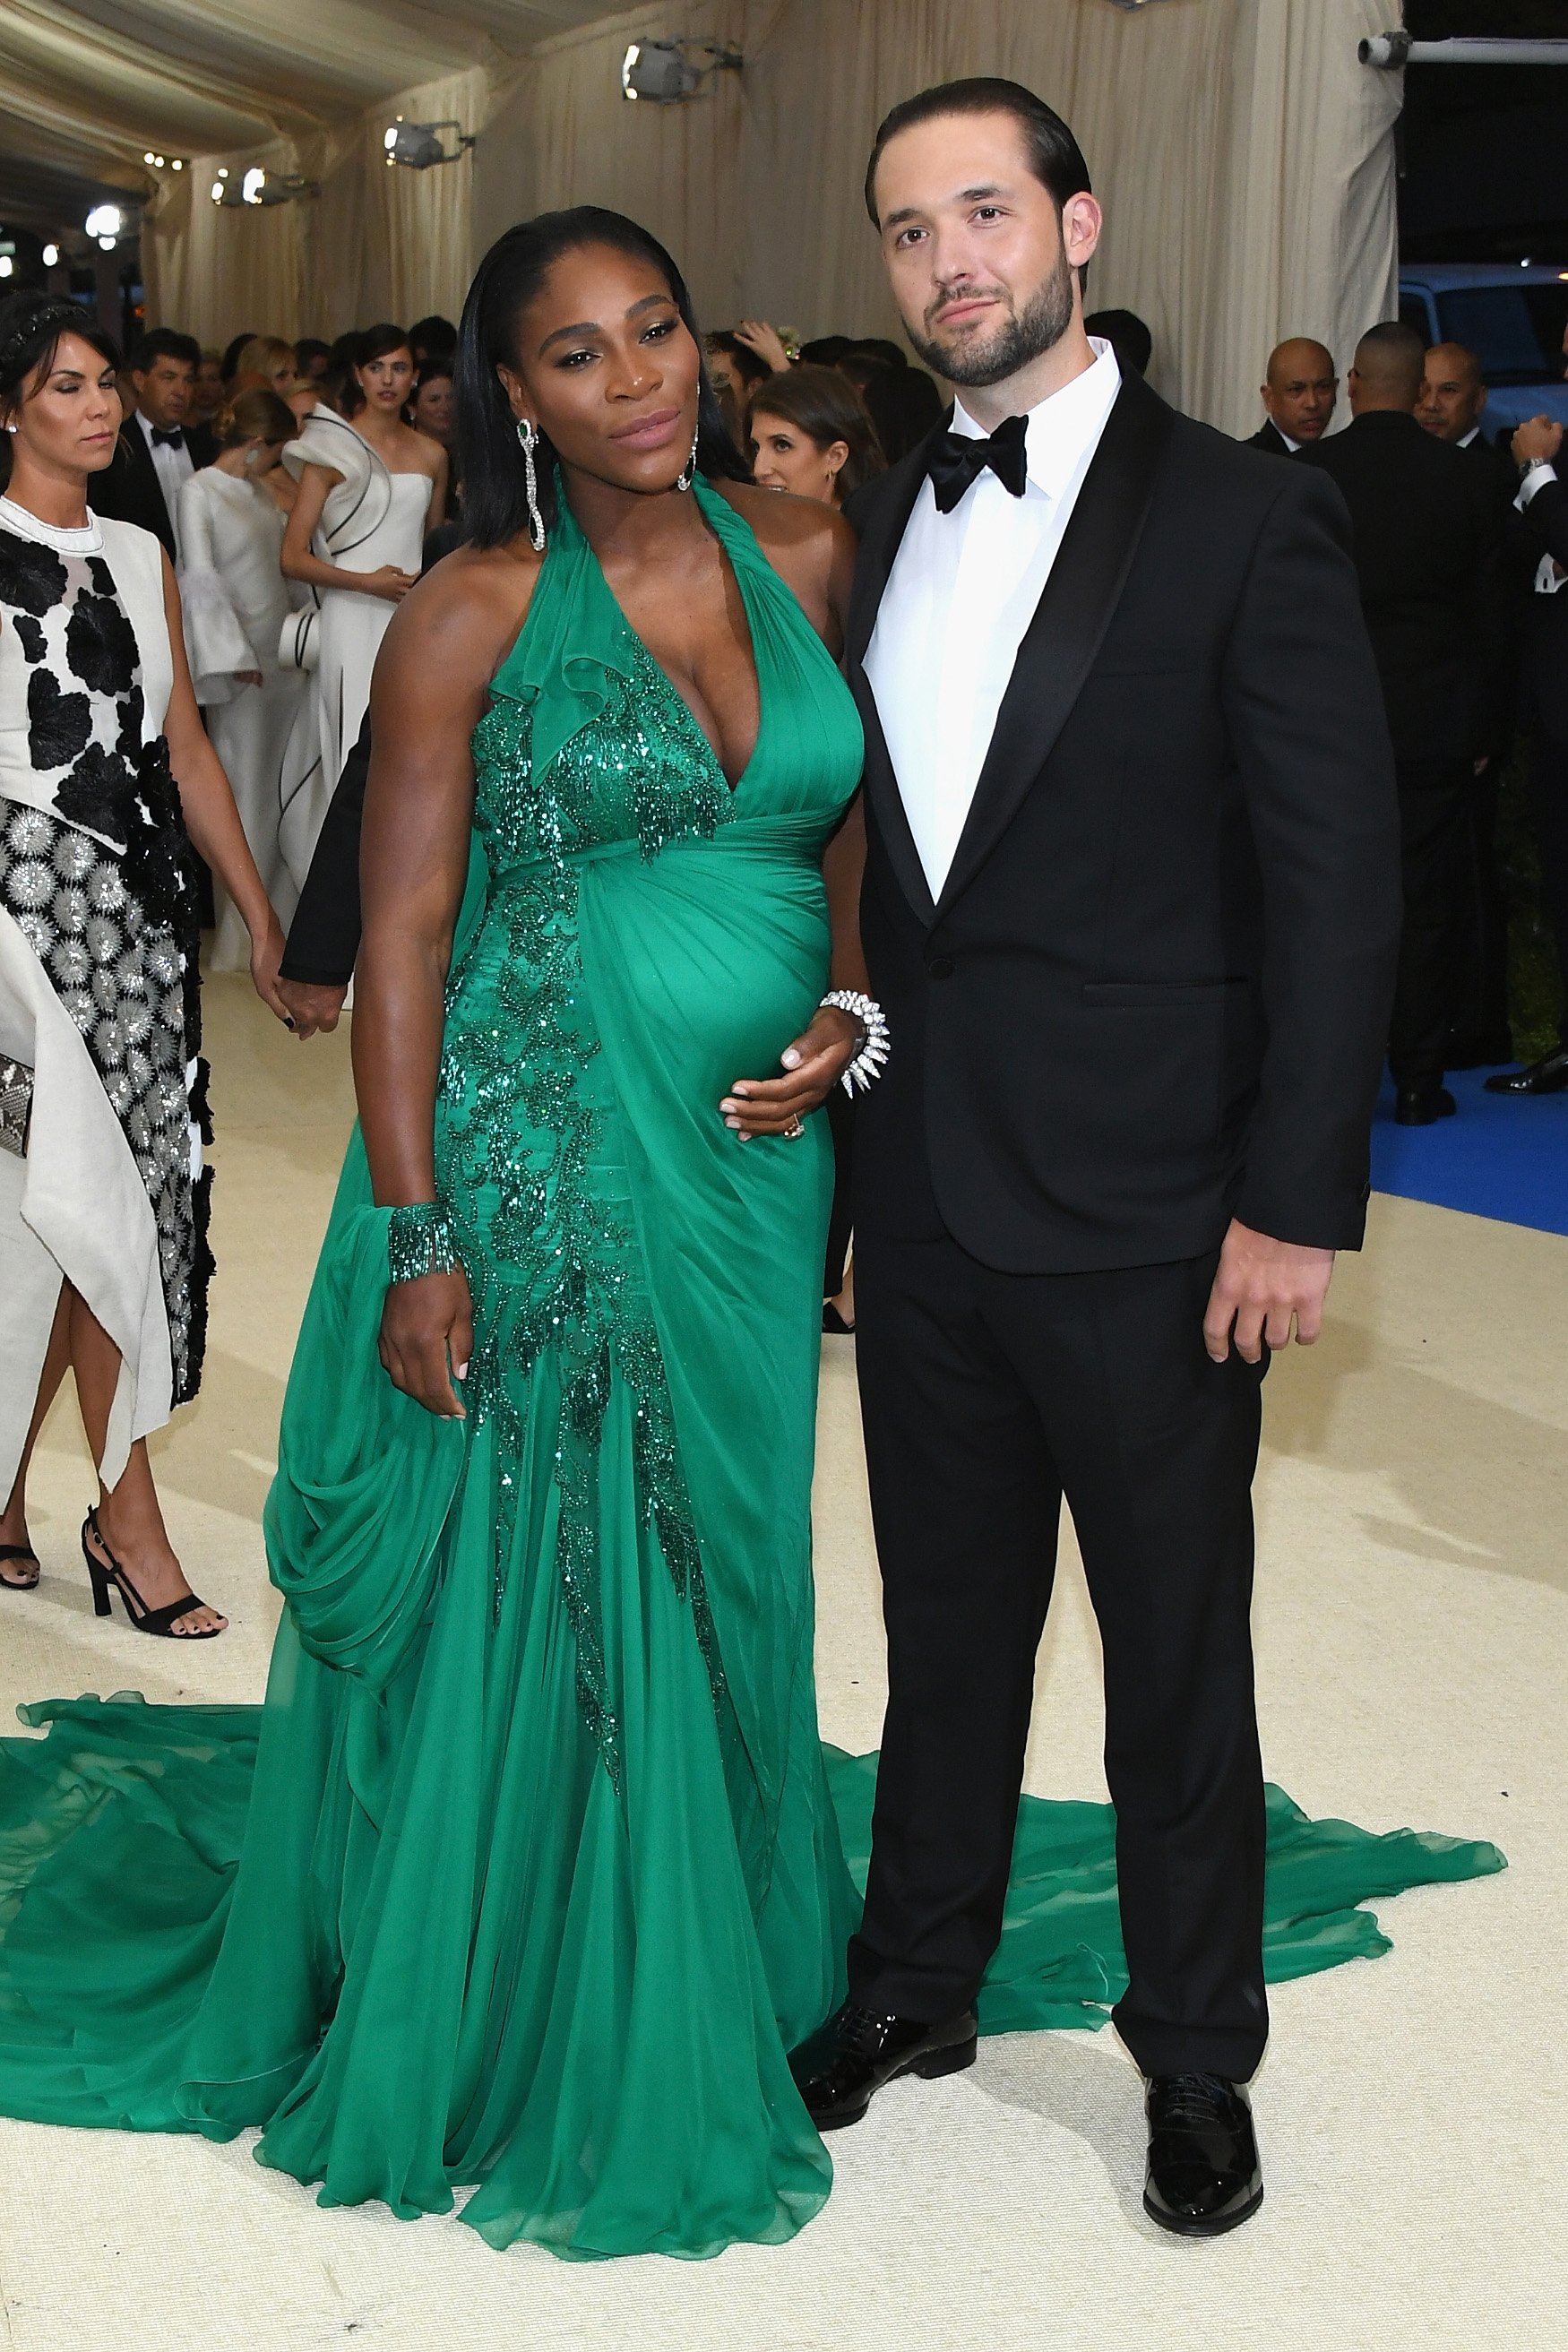 Serena Williams and Alexis Ohanian at the "Rei Kawakubo/Comme des Garcons: Art Of The In-Between" Costume Institute Gala on May 1, 2017, in New York City. | Source: Dia Dipasupil/Getty Images